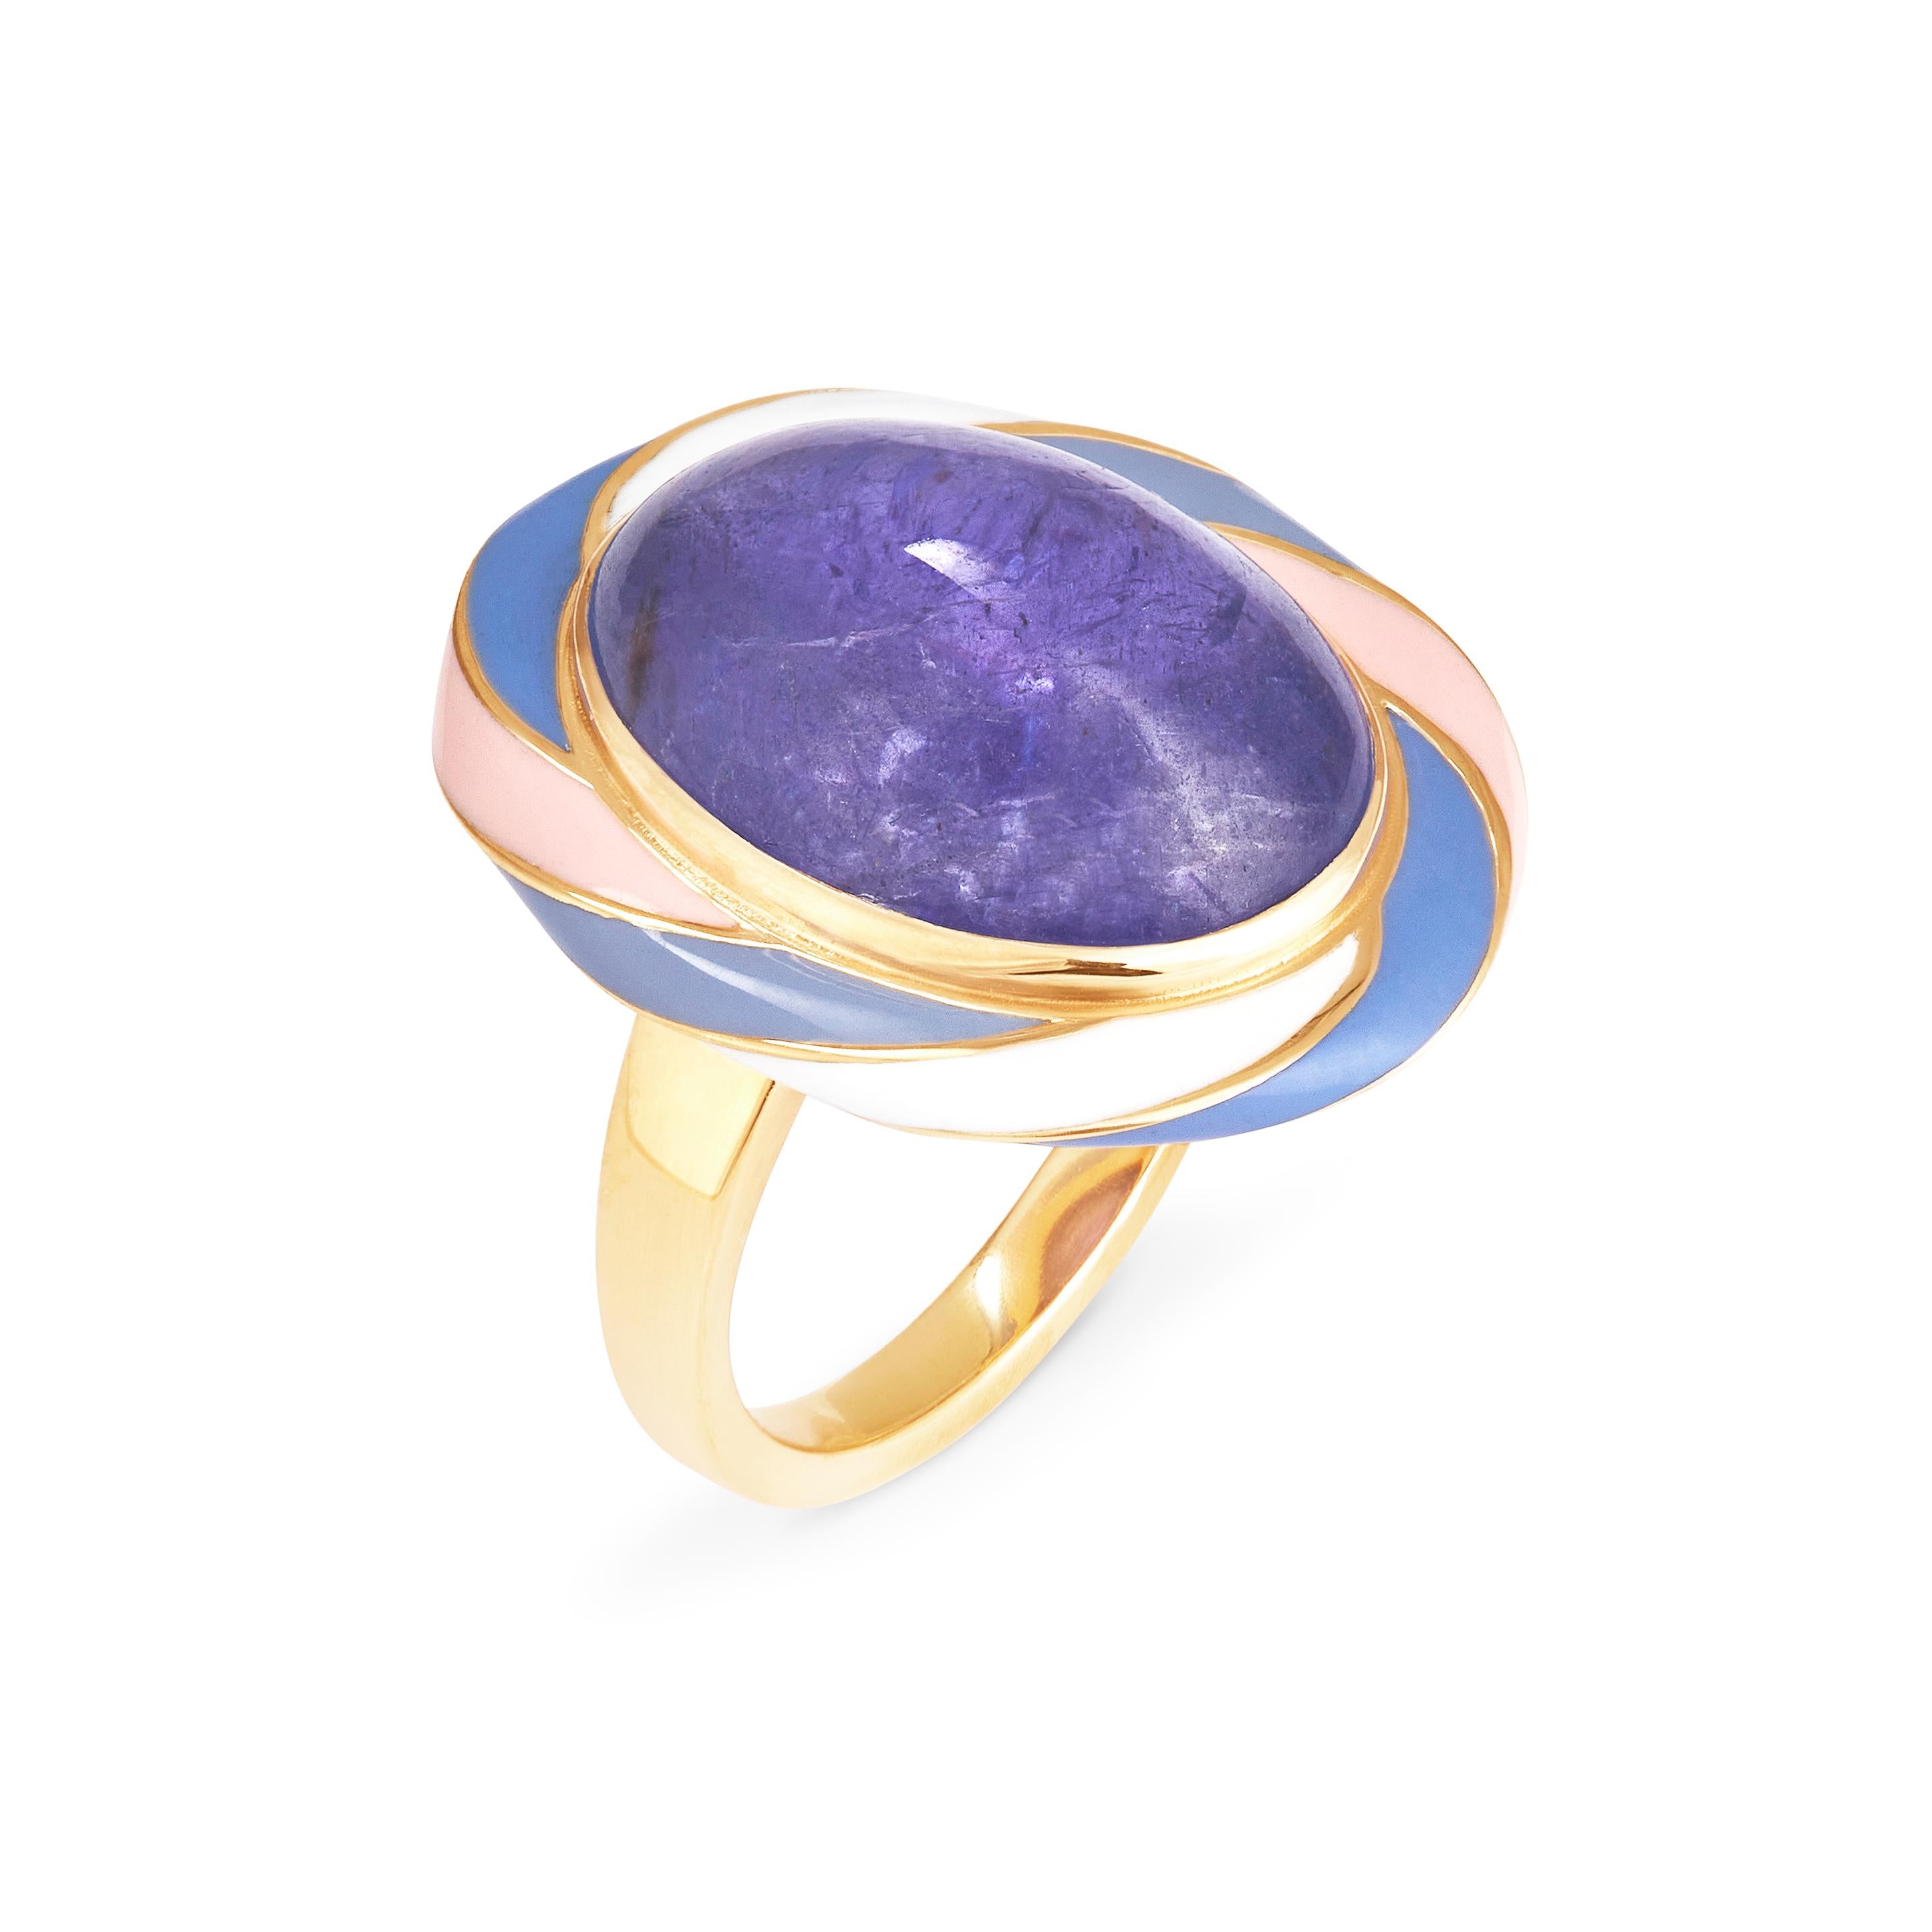 Prepare to be enveloped in a sensory feast like no other as you embark on a journey with this mesmerizing gold ring. Indulge your senses as you gaze upon your finger, bedazzled by the breathtaking sight of a tanzanite Parma Violet creation that